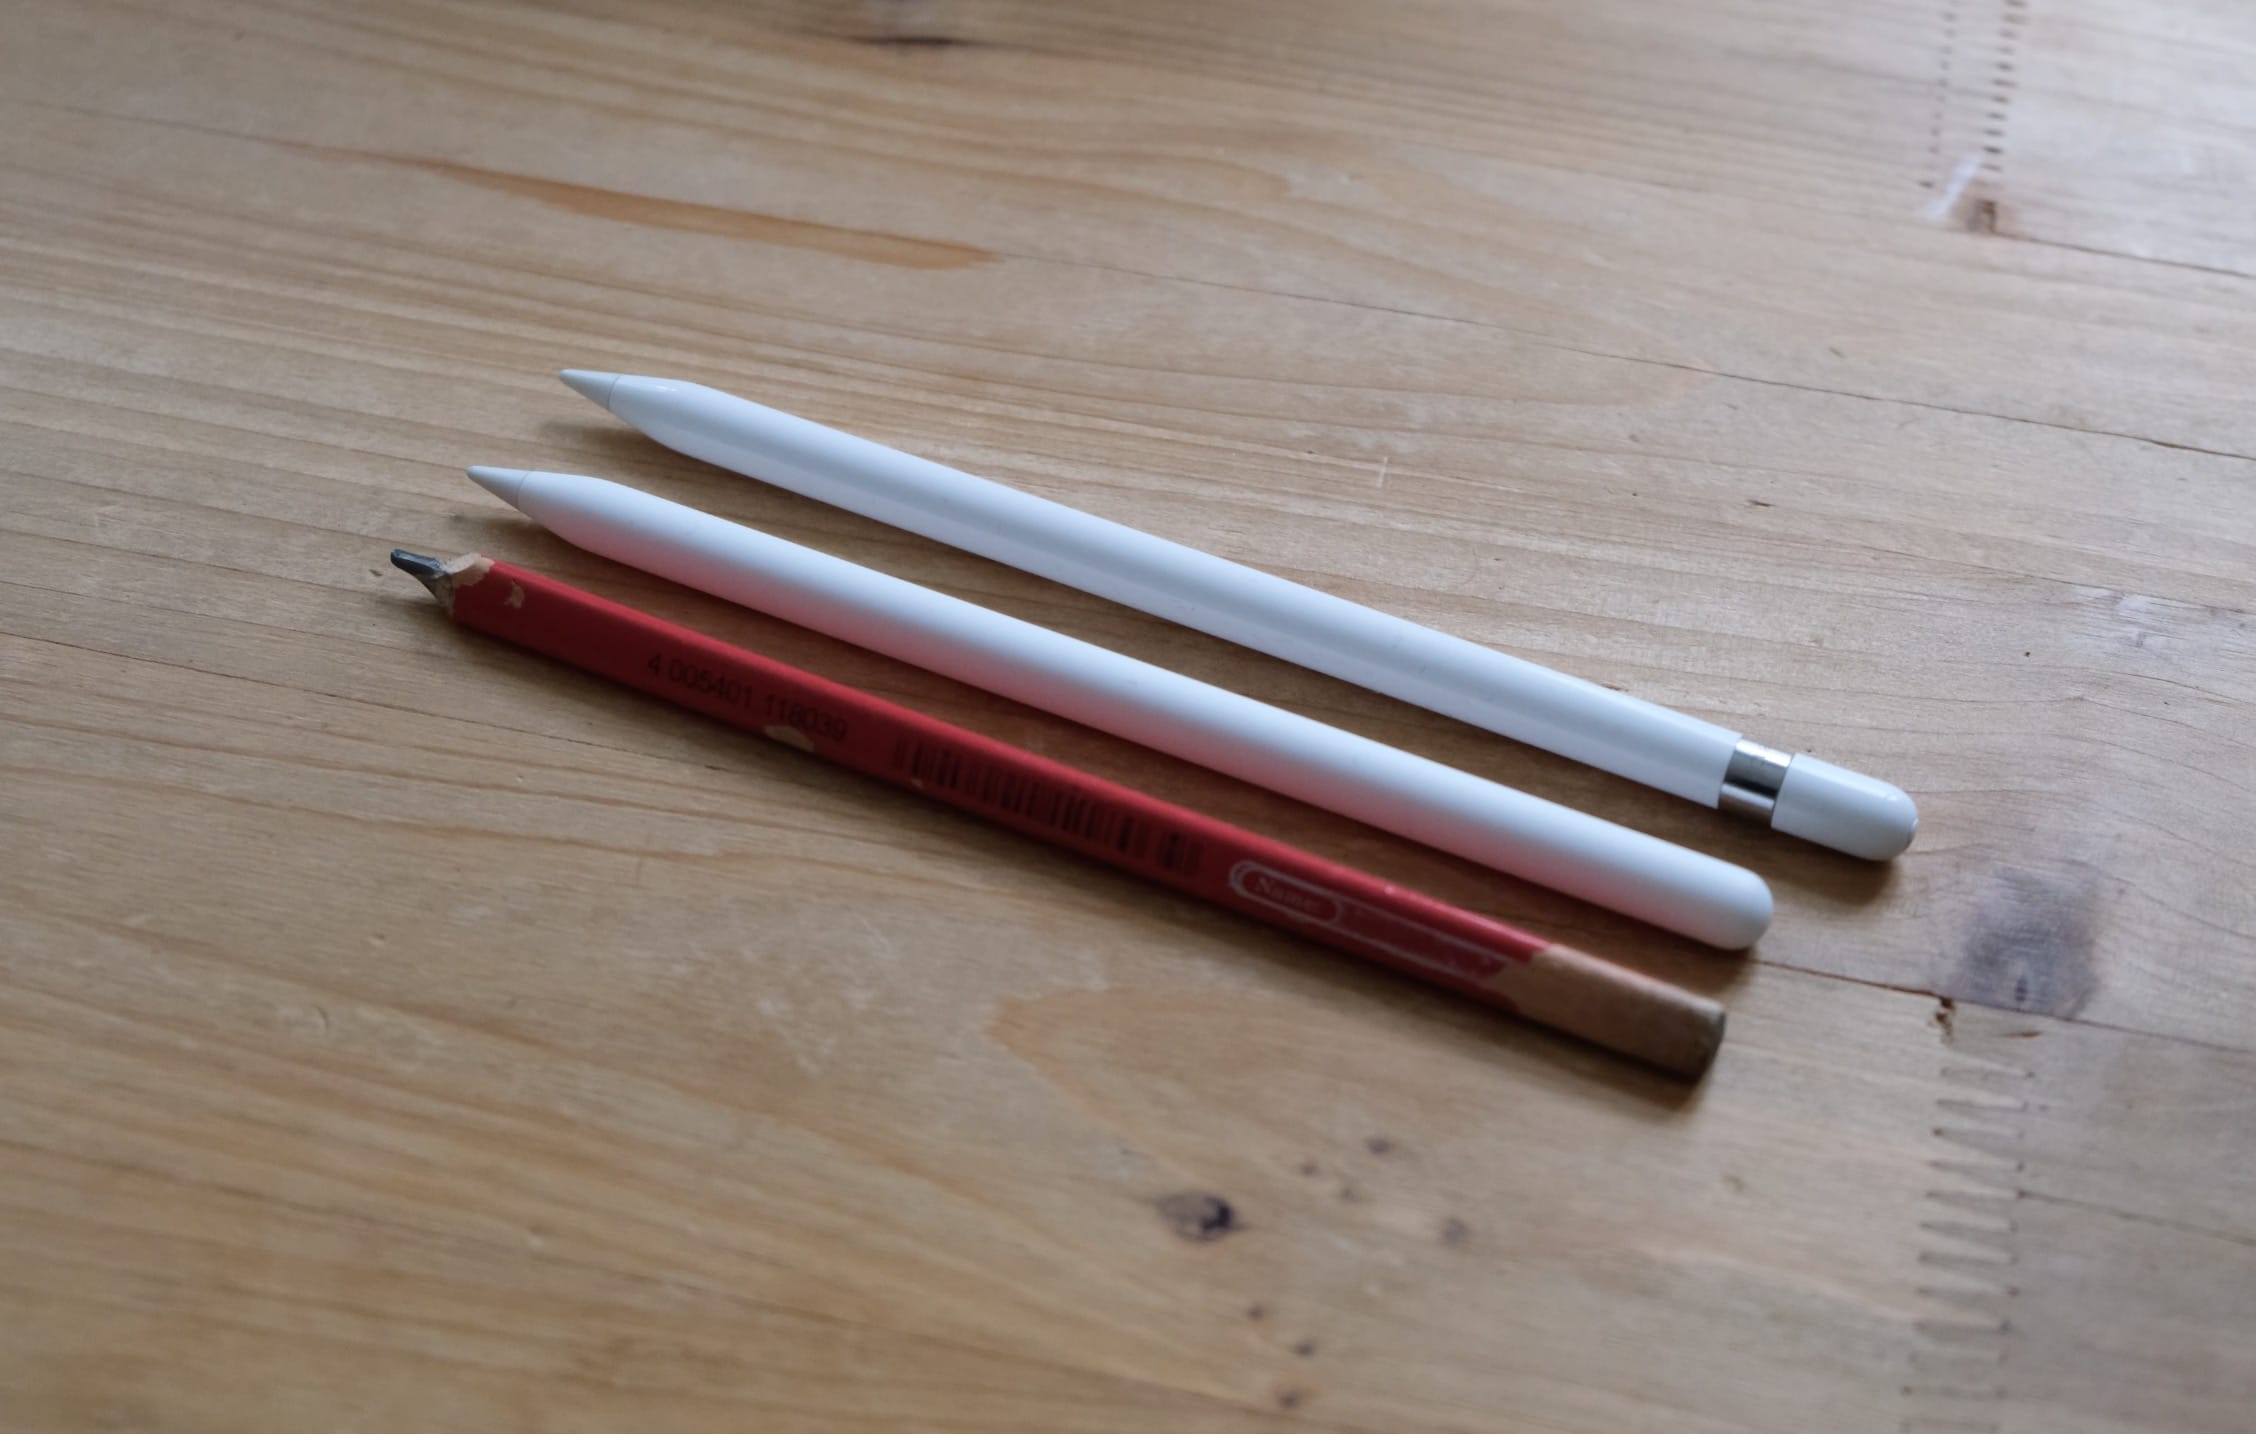 The new Apple Pencil is much nicer than the old one.